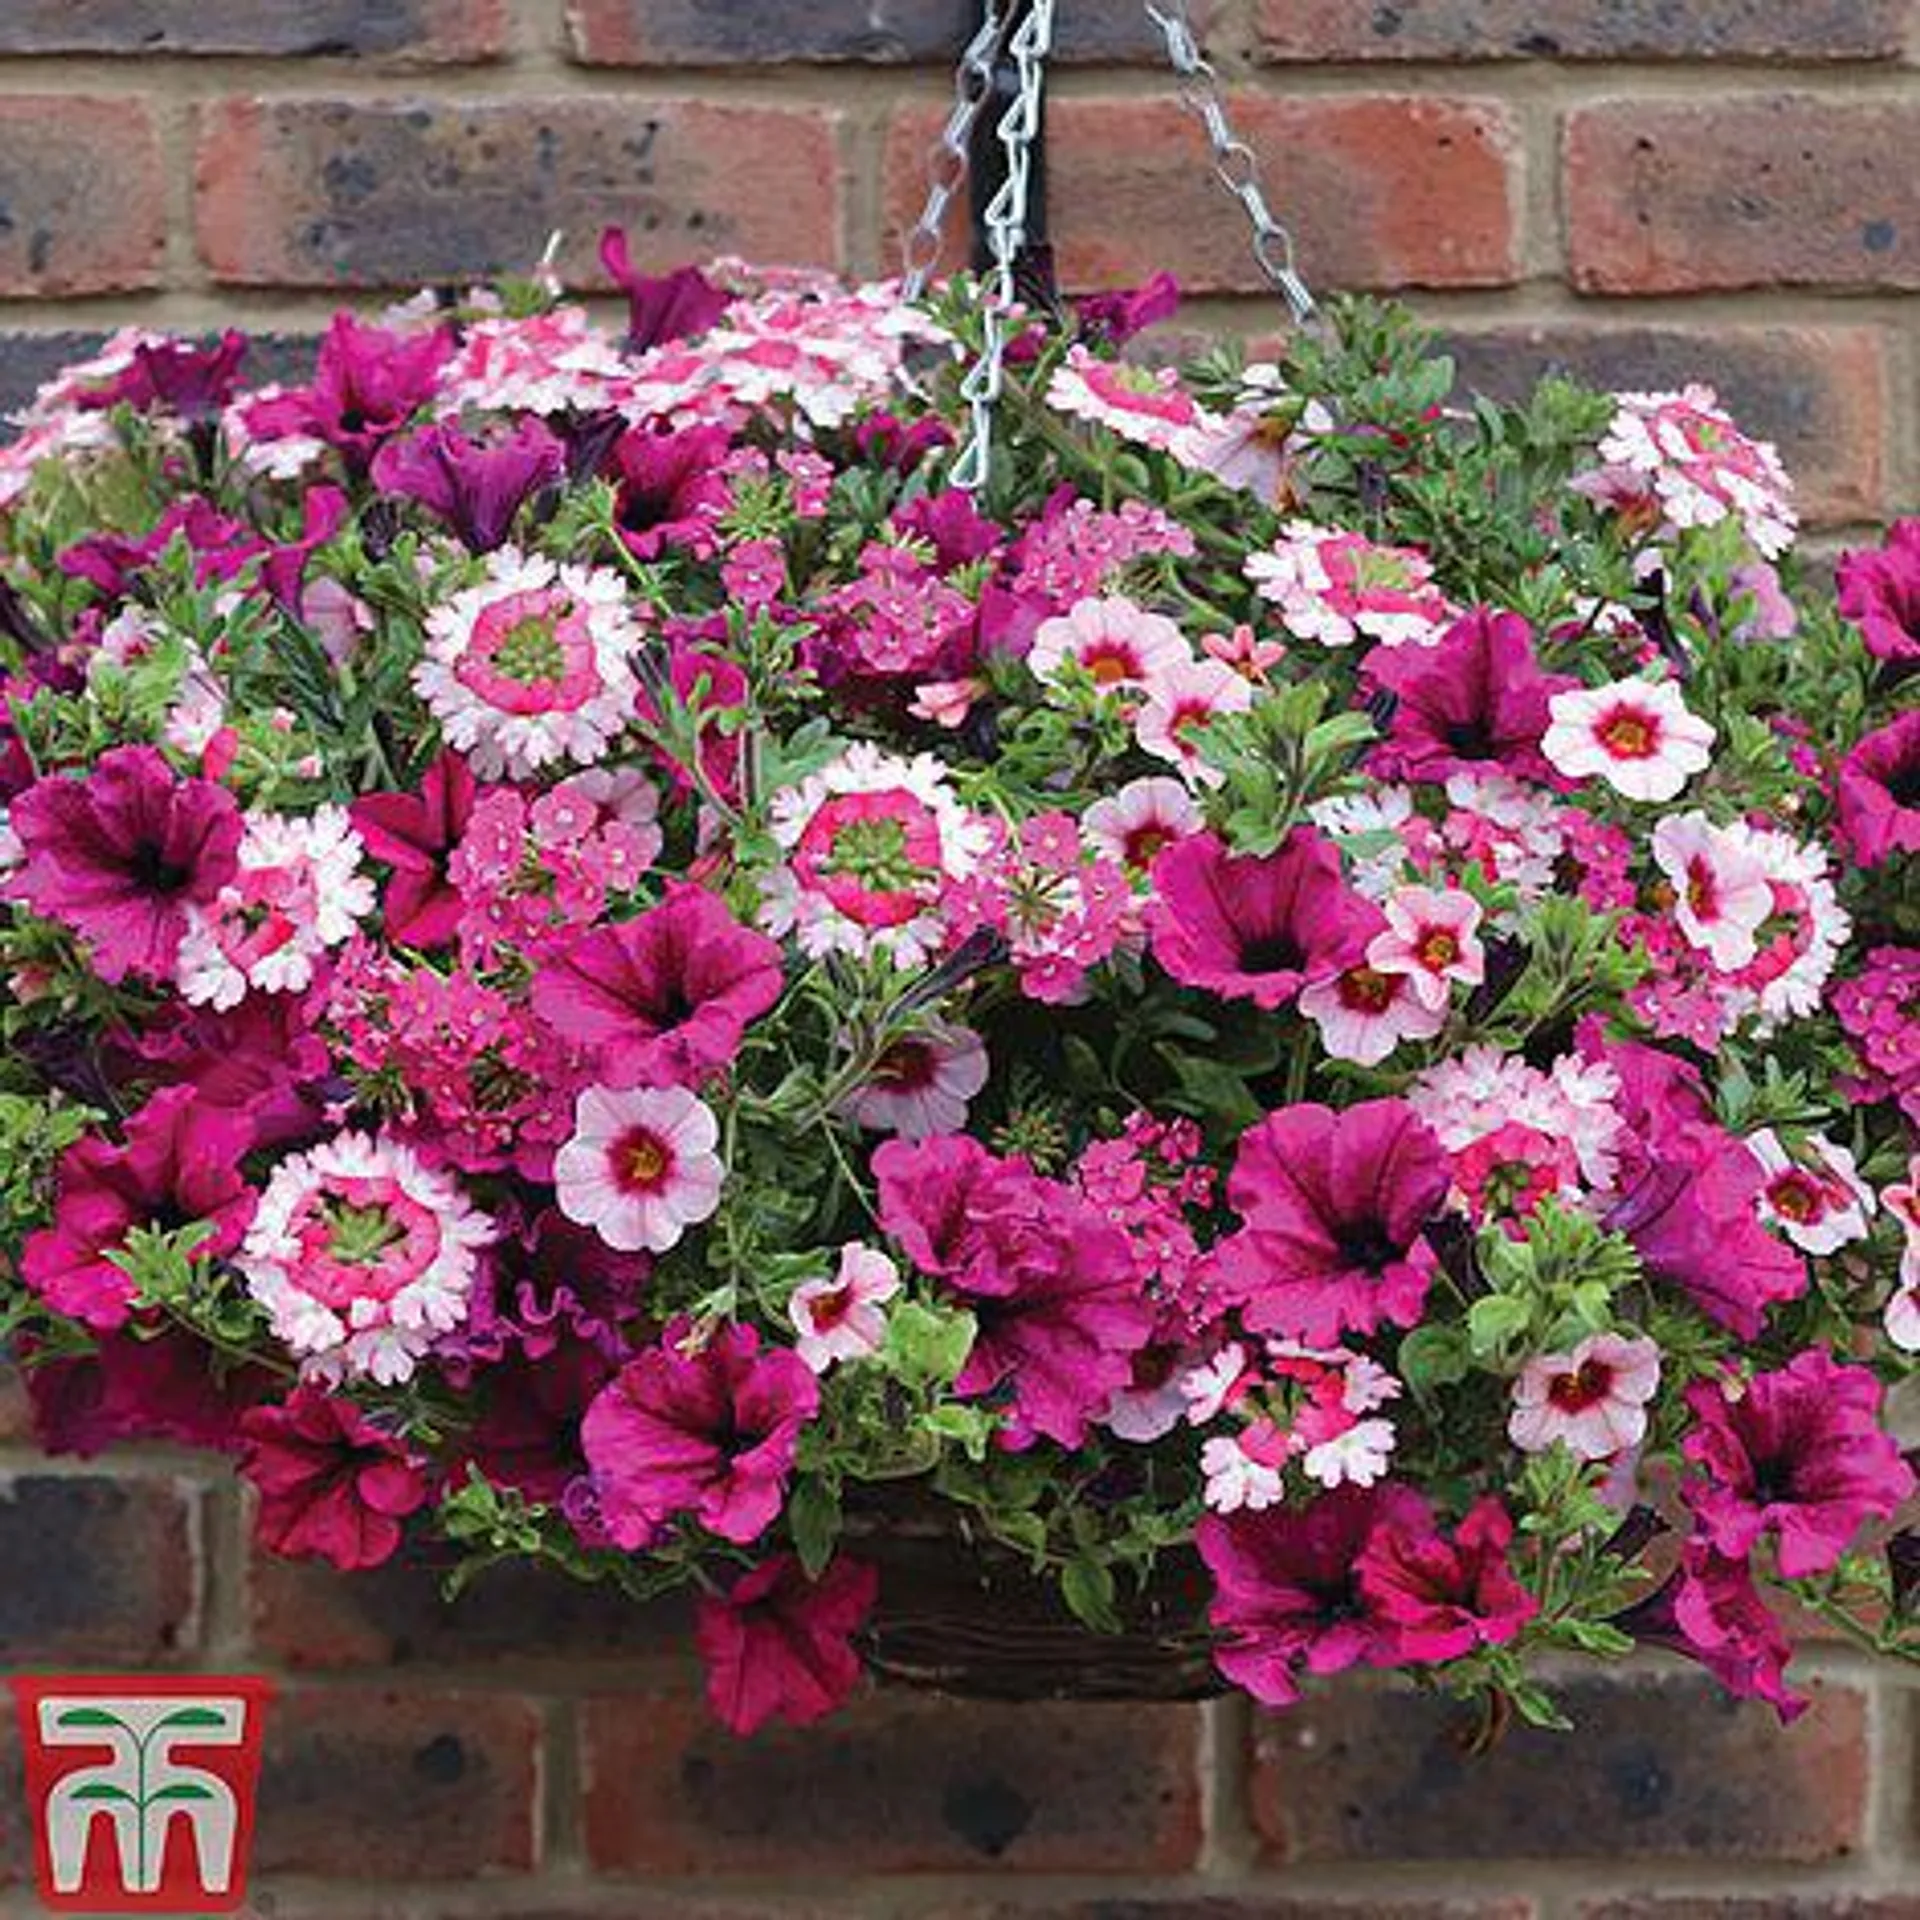 Buy two 25cm Pre-Planted Baskets ONLY £34.99